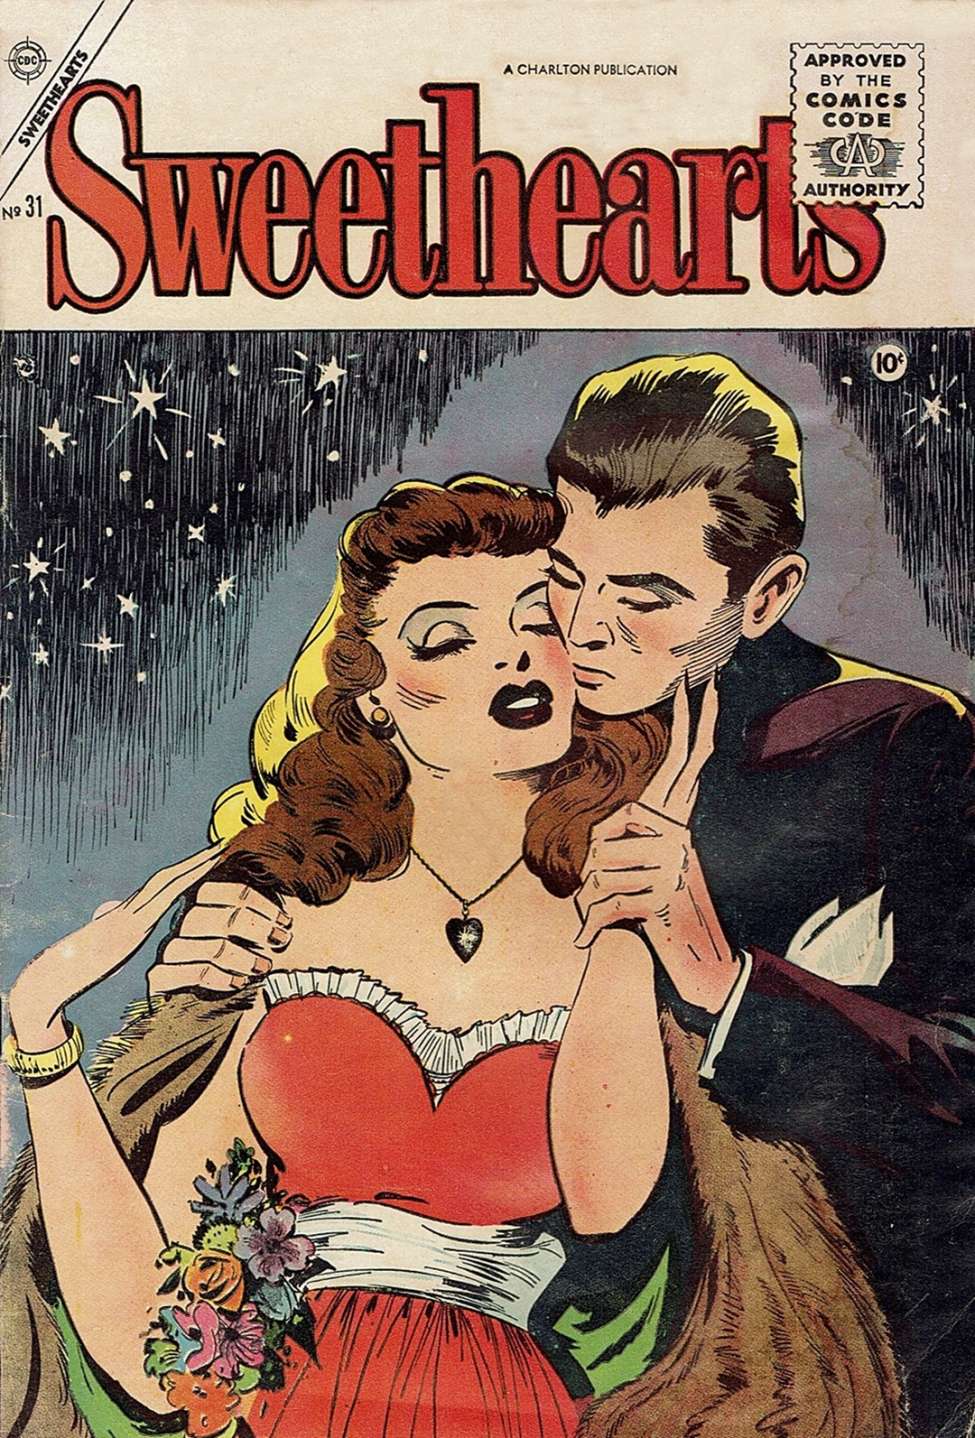 Book Cover For Sweethearts 31 - Version 1